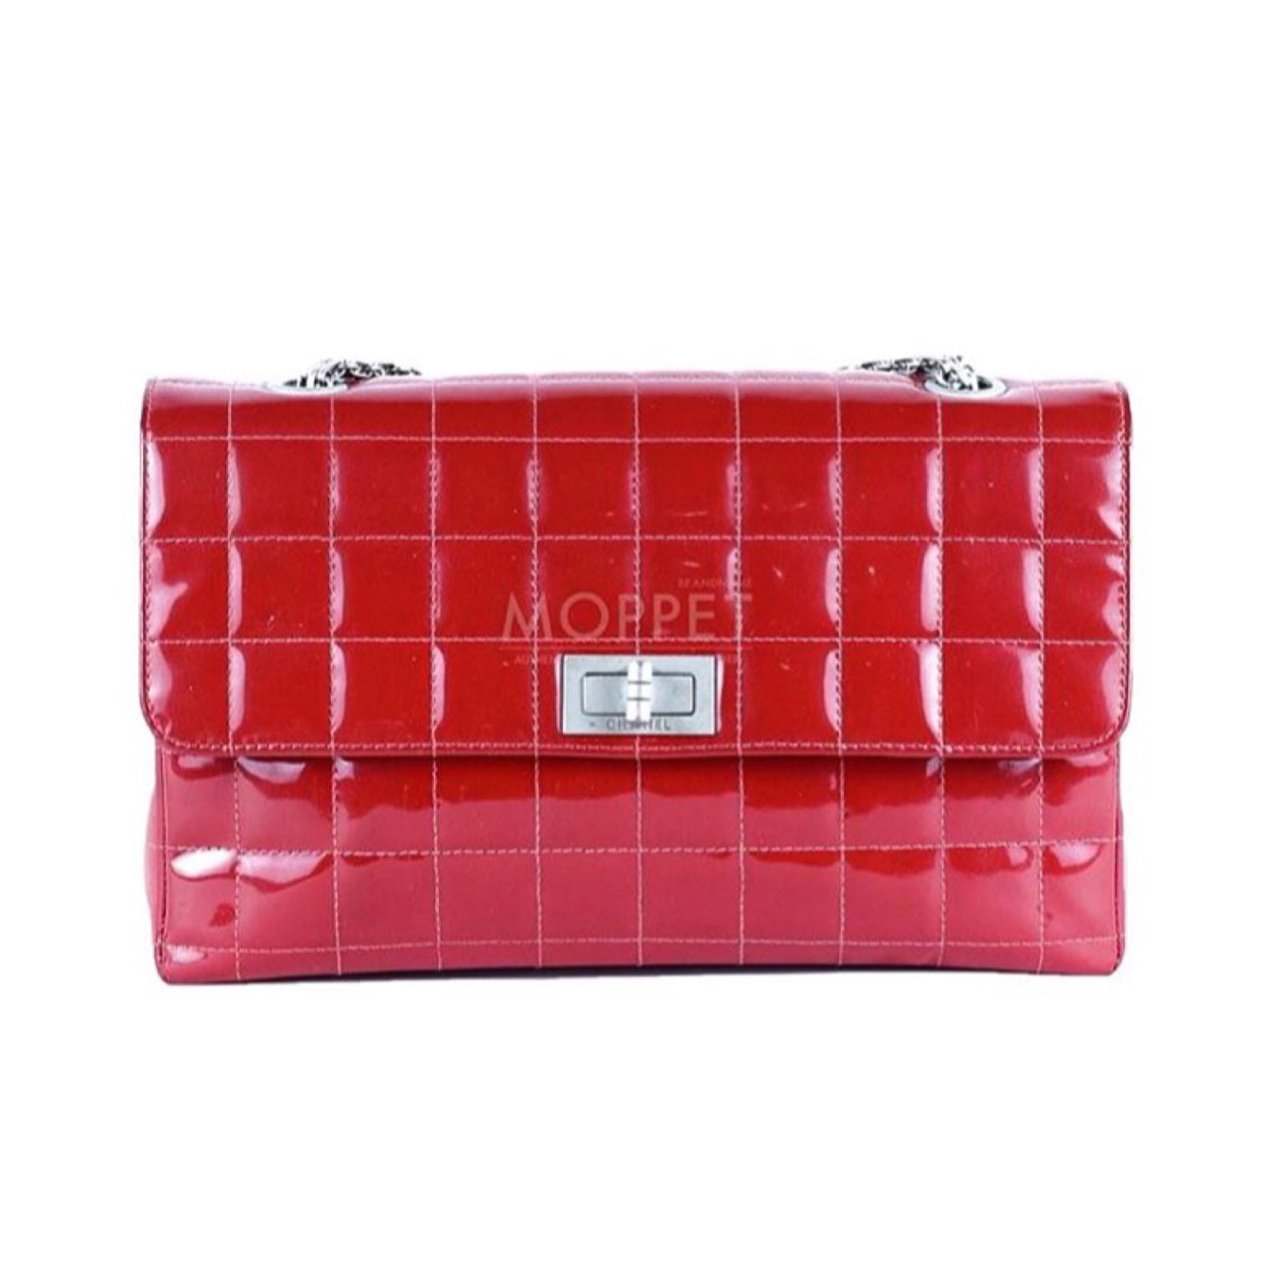 Used Chanel Reissue 226 in Red Patent RHW